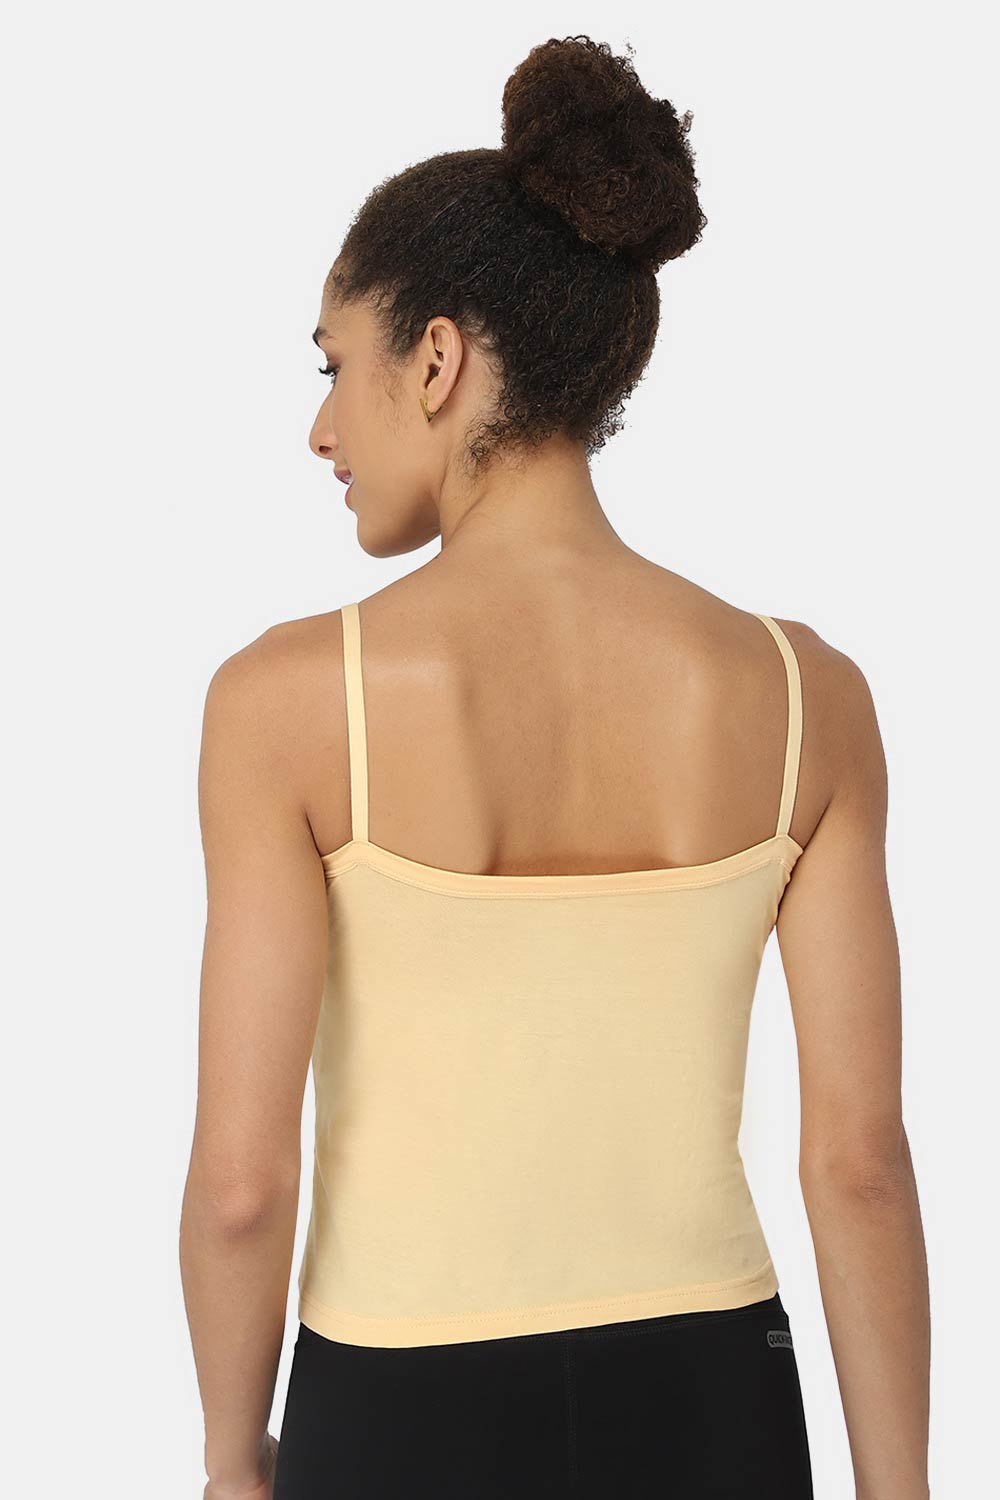 Intimacy Camisole-Slip Special Combo Pack - In05 - Pack of 2 - C01